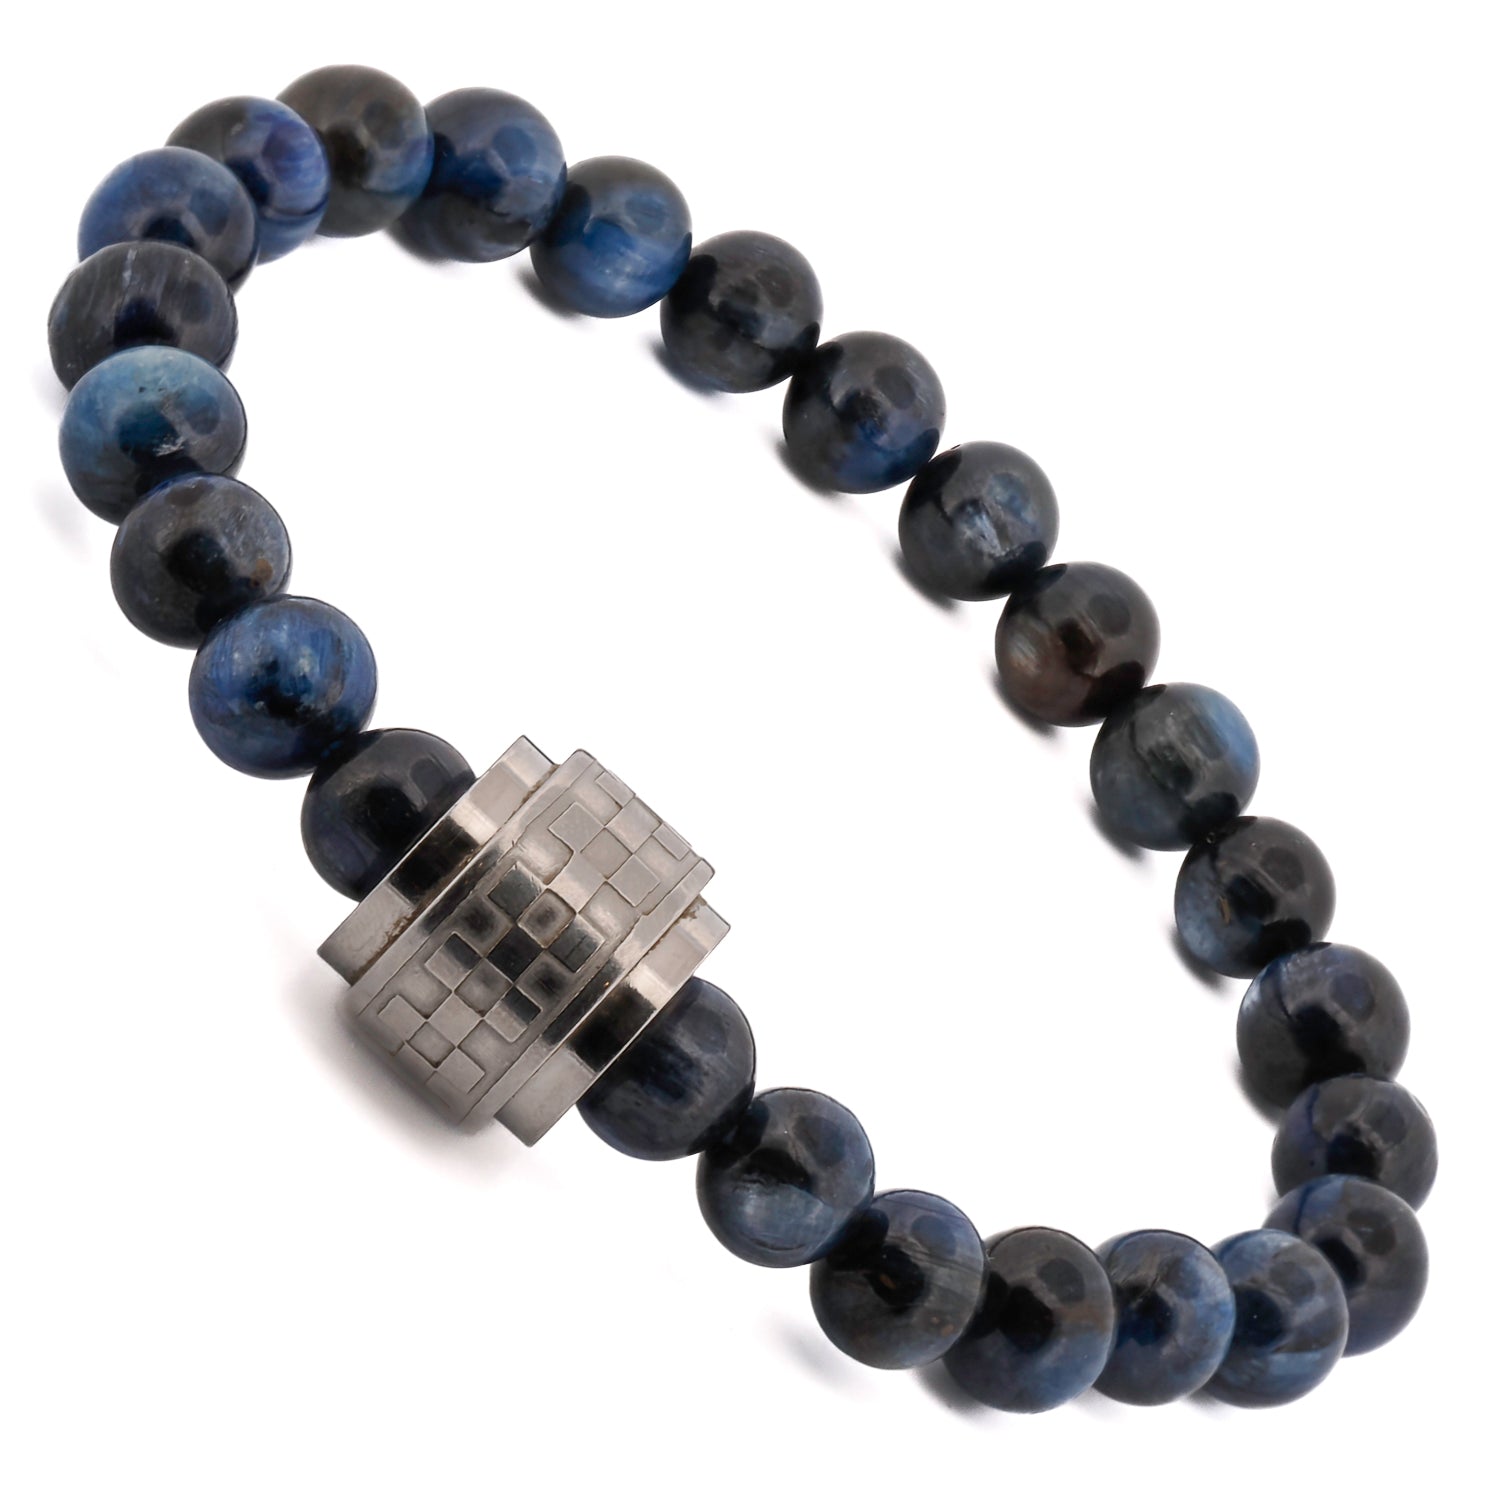 Unique Blue Tiger's Eye Stone and Stainless Steel Amour Bracelet, handcrafted for men who appreciate unique jewelry